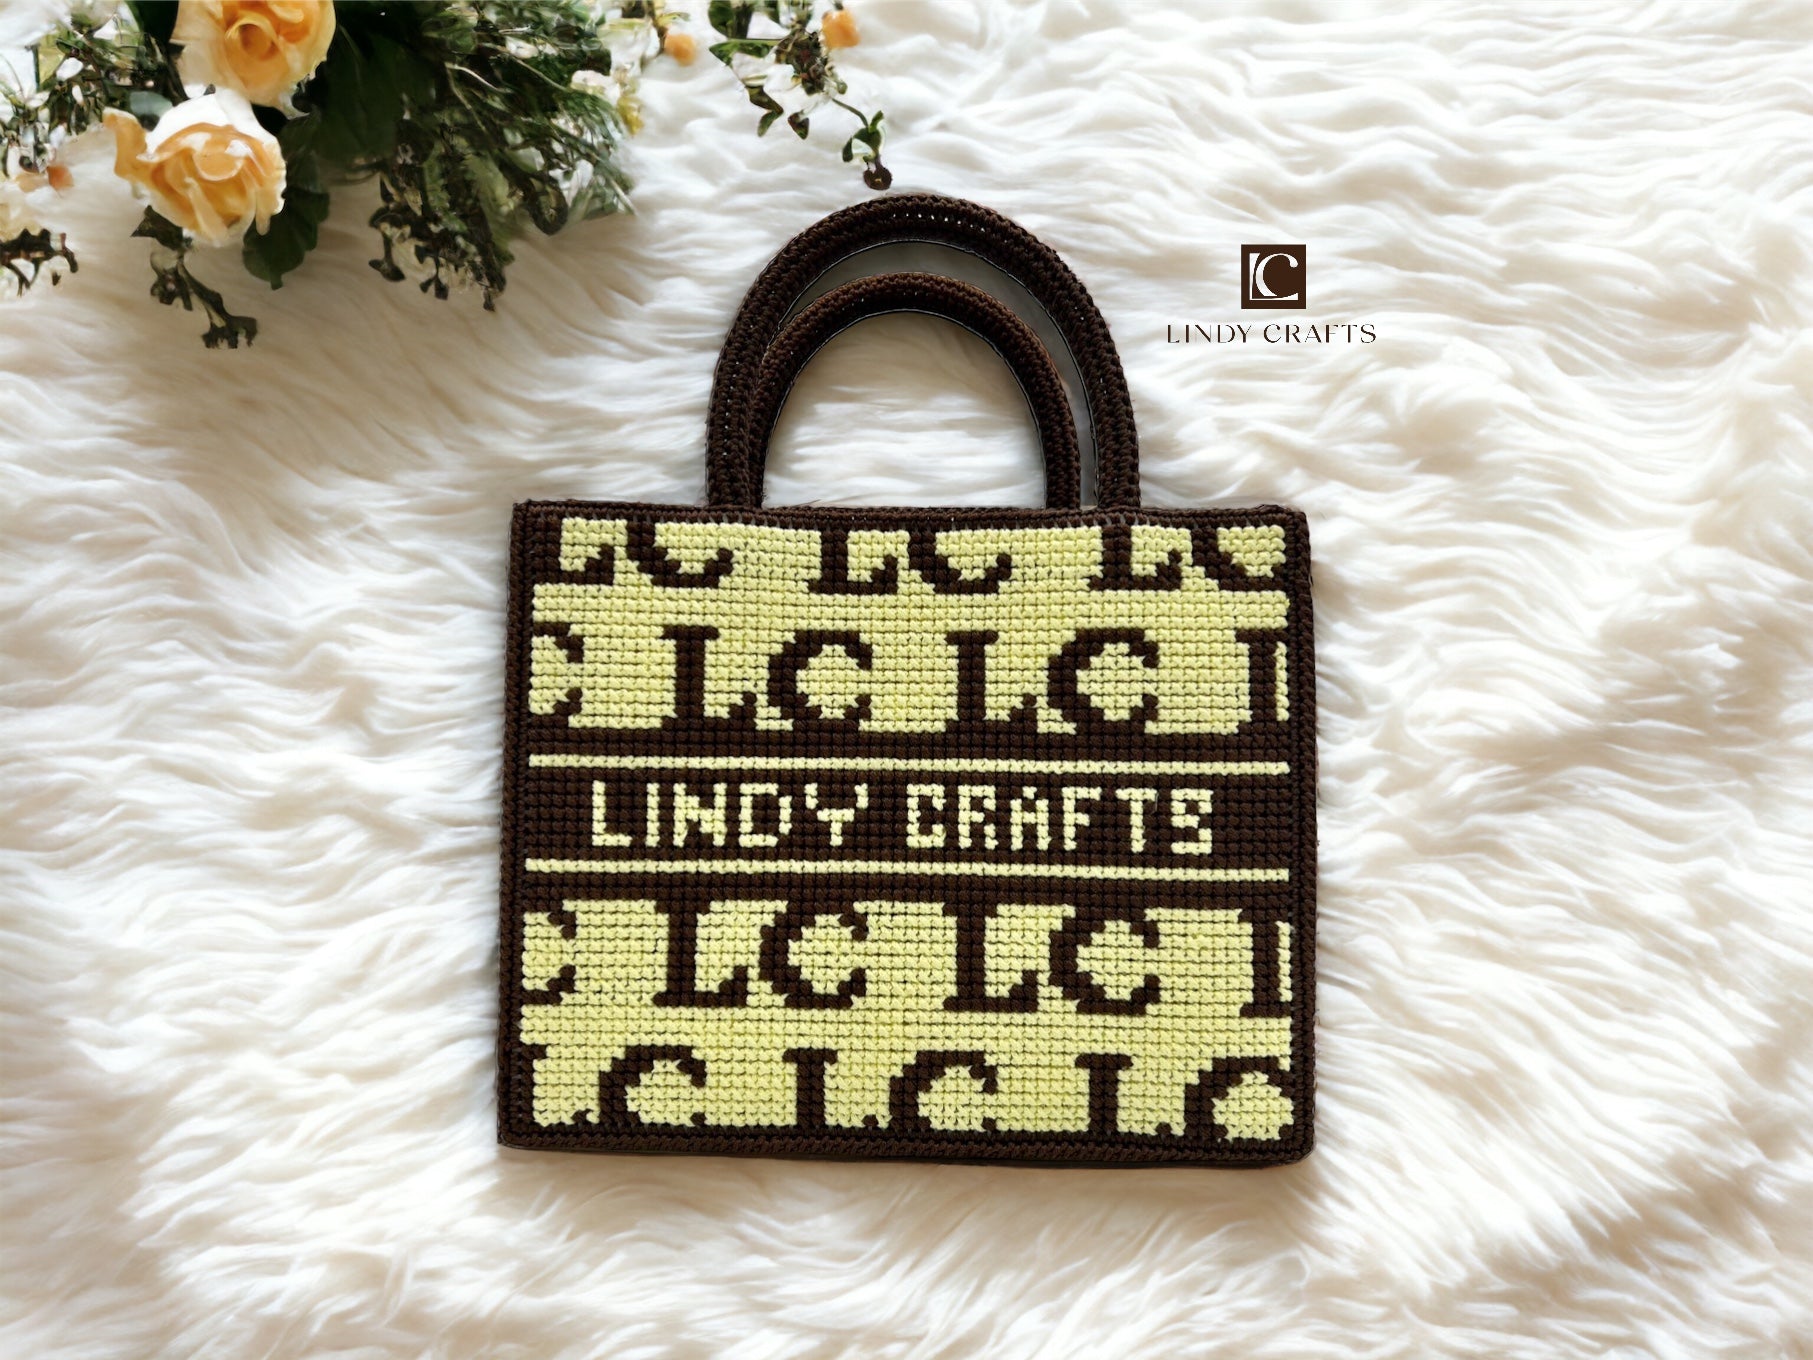 Unique Personalized Name-Embroidered Bag - Made To order